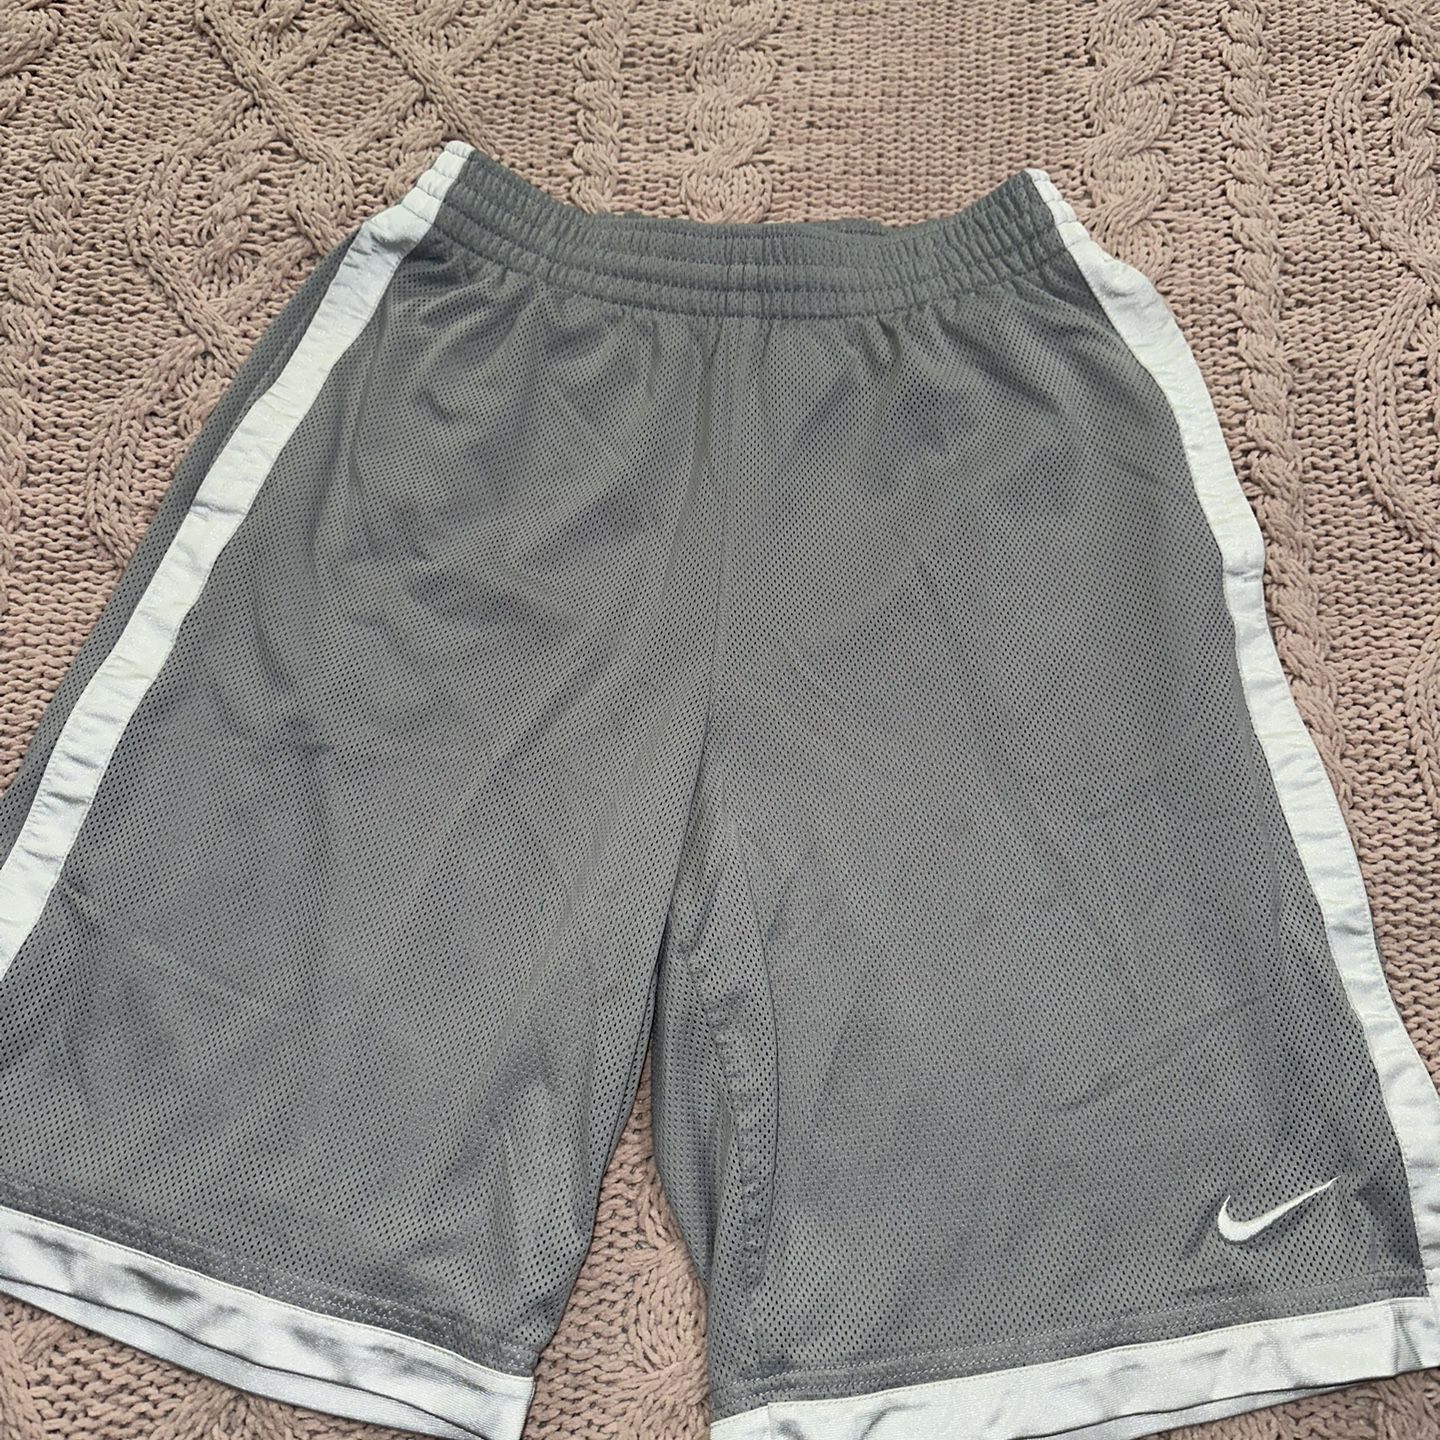 Fear Of God x Nike Basketball Shorts Light Cream Mens Size Medium for Sale  in Mission Viejo, CA - OfferUp